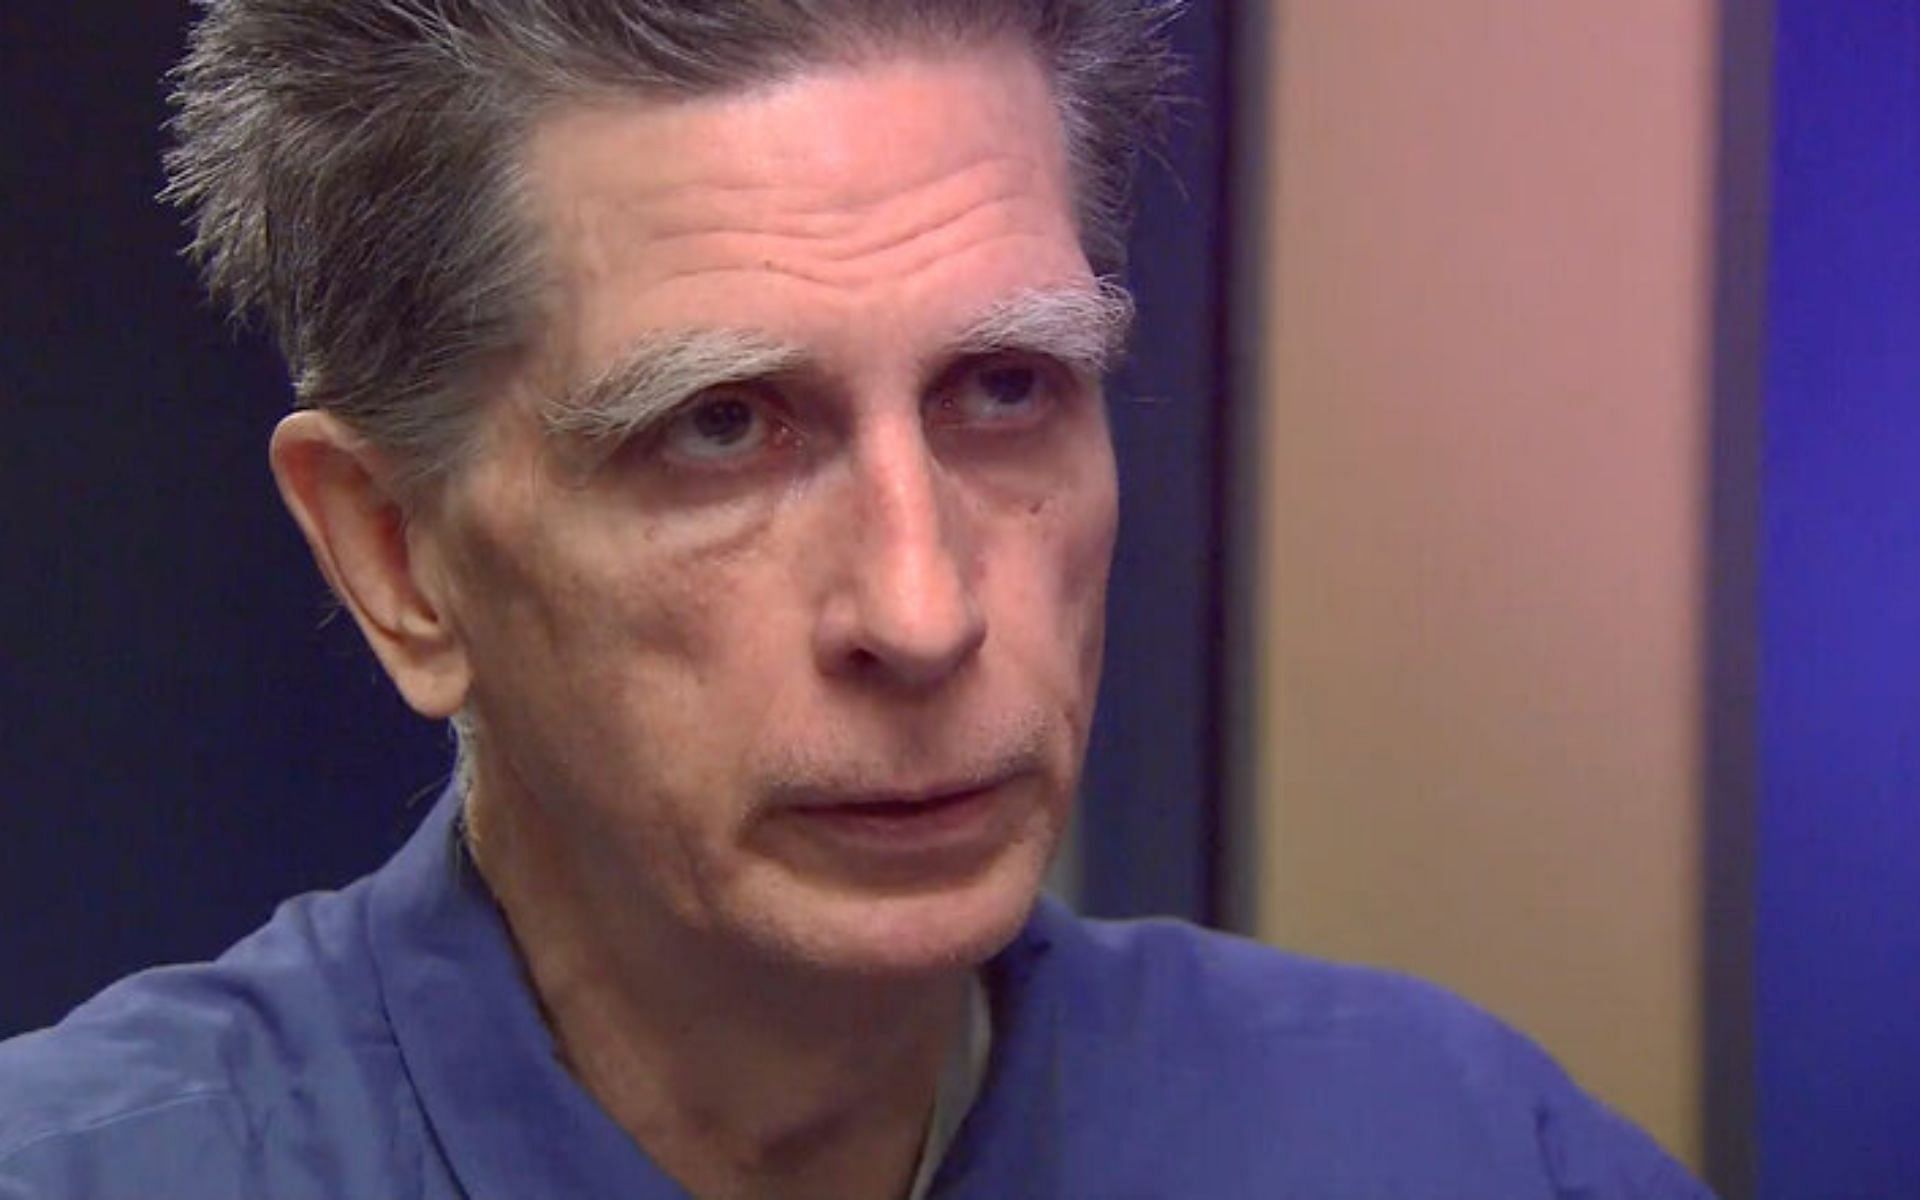 Gregory Mordick was found guilty during a January 2011 trial (Image via NBC)